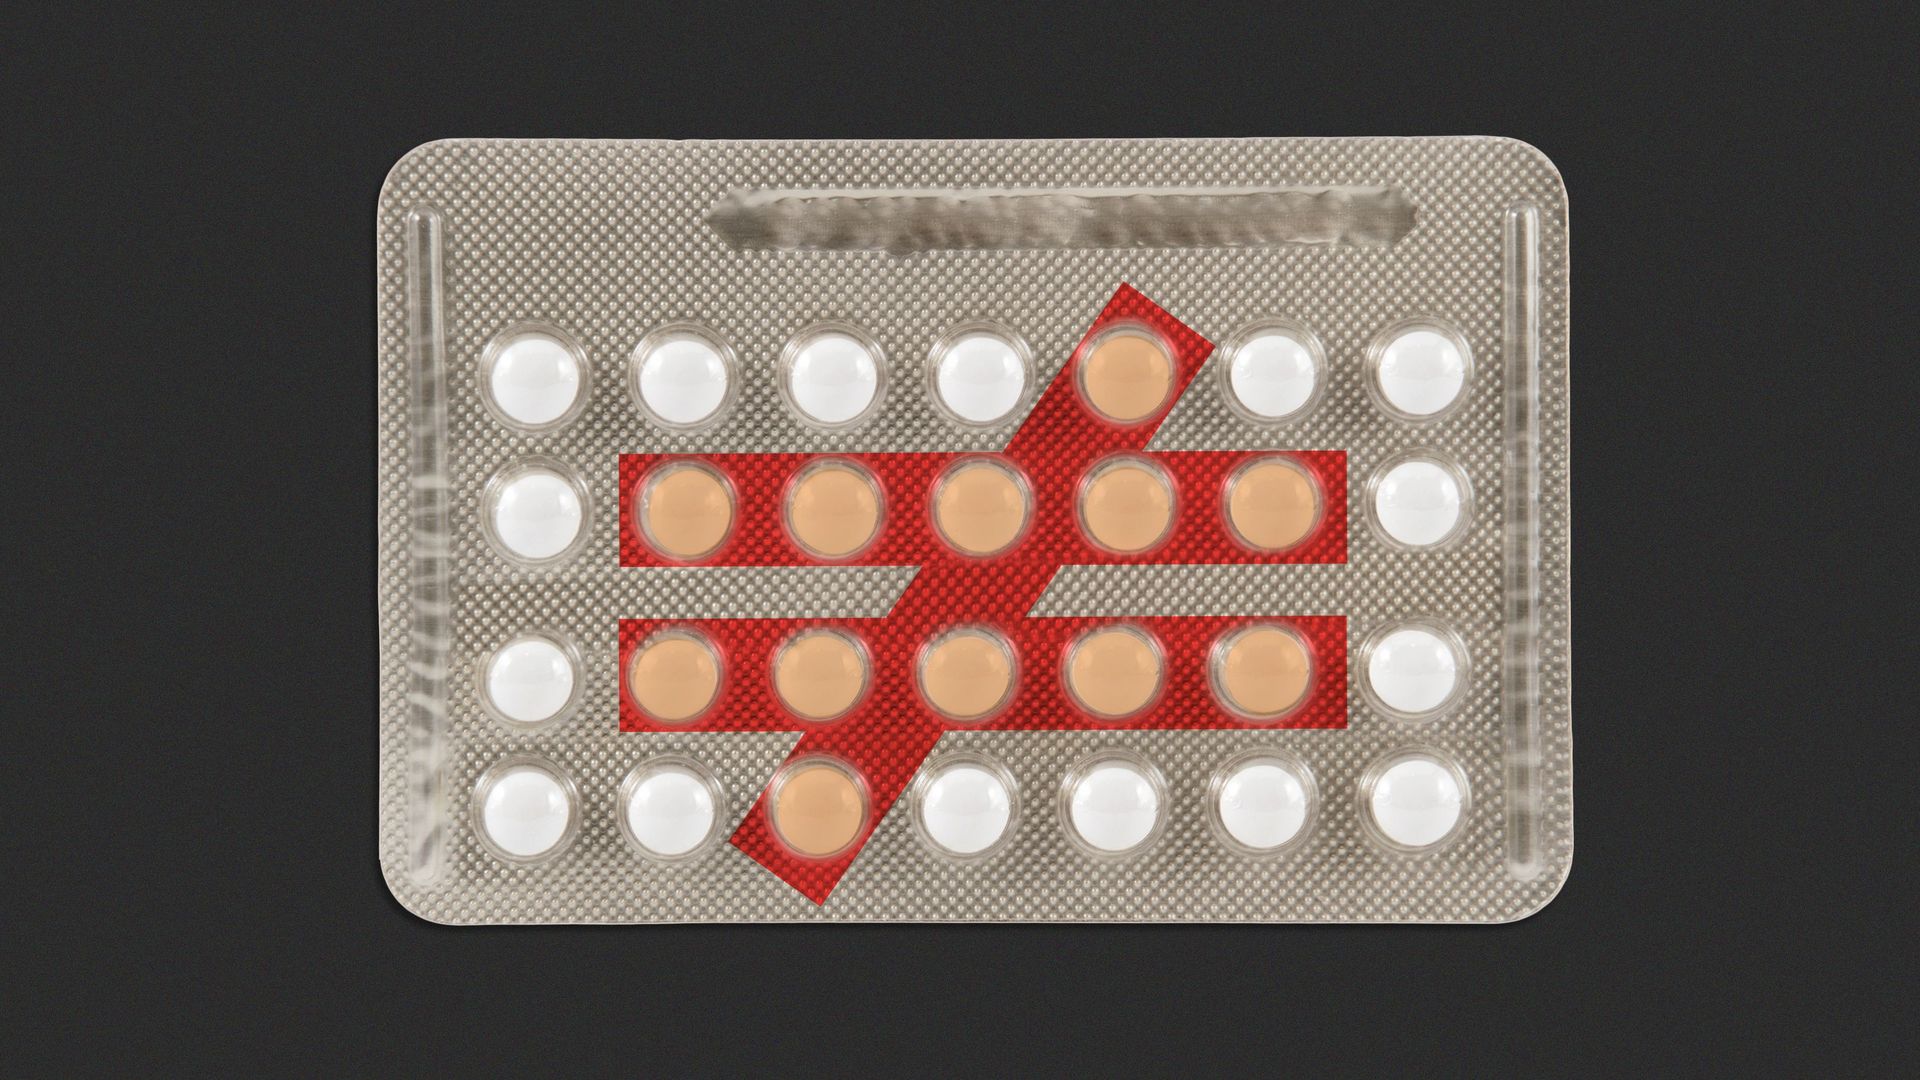 Illustration of contraceptive pills with an inequality sign overlaid on top.